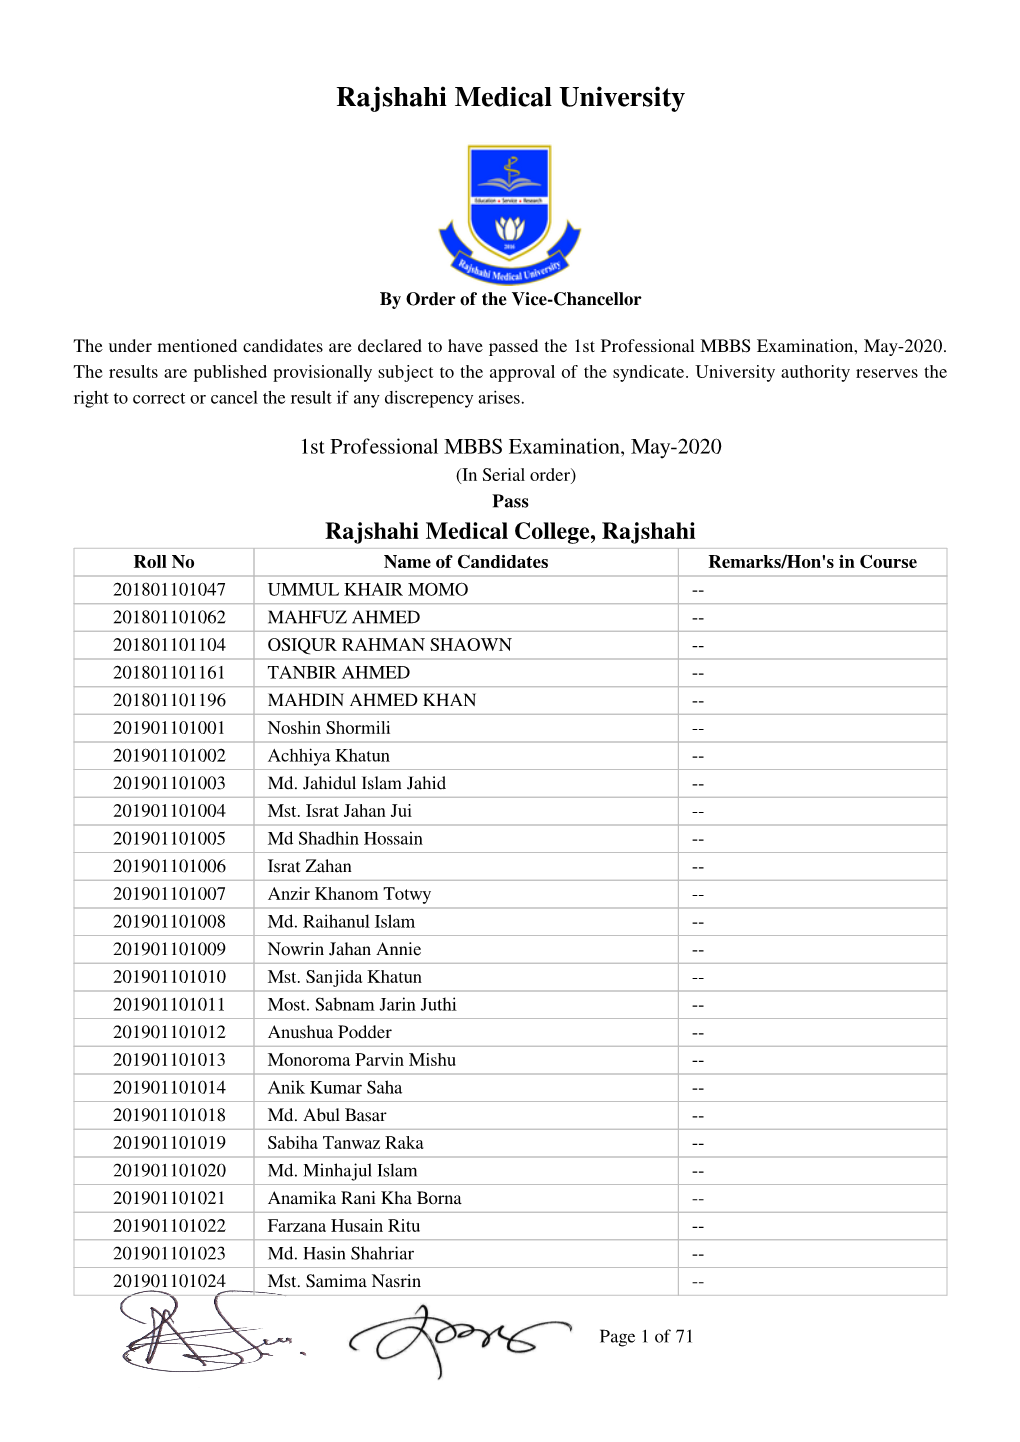 MBBS-2020 1St Year Result